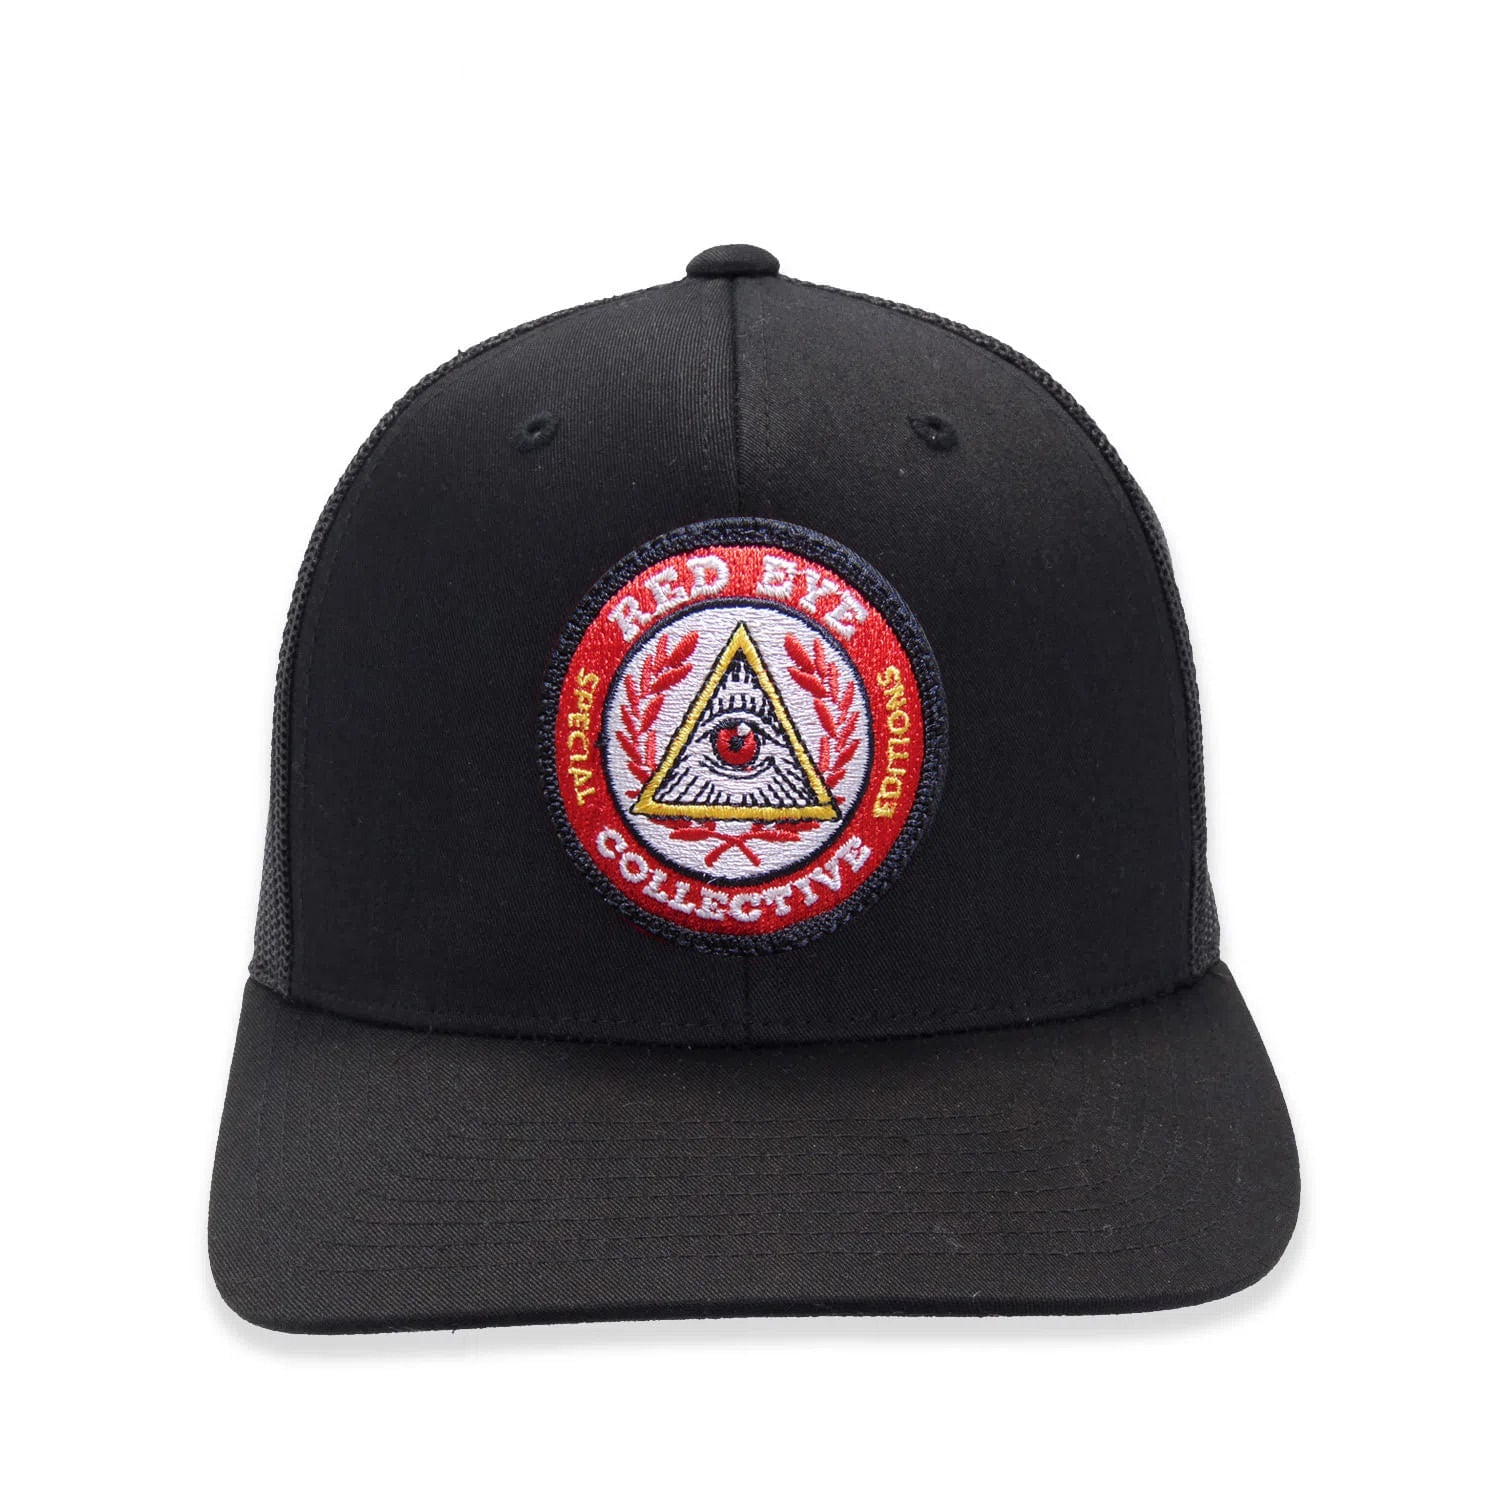 Red Oxx Red Eye Collective logo on trucker hat 